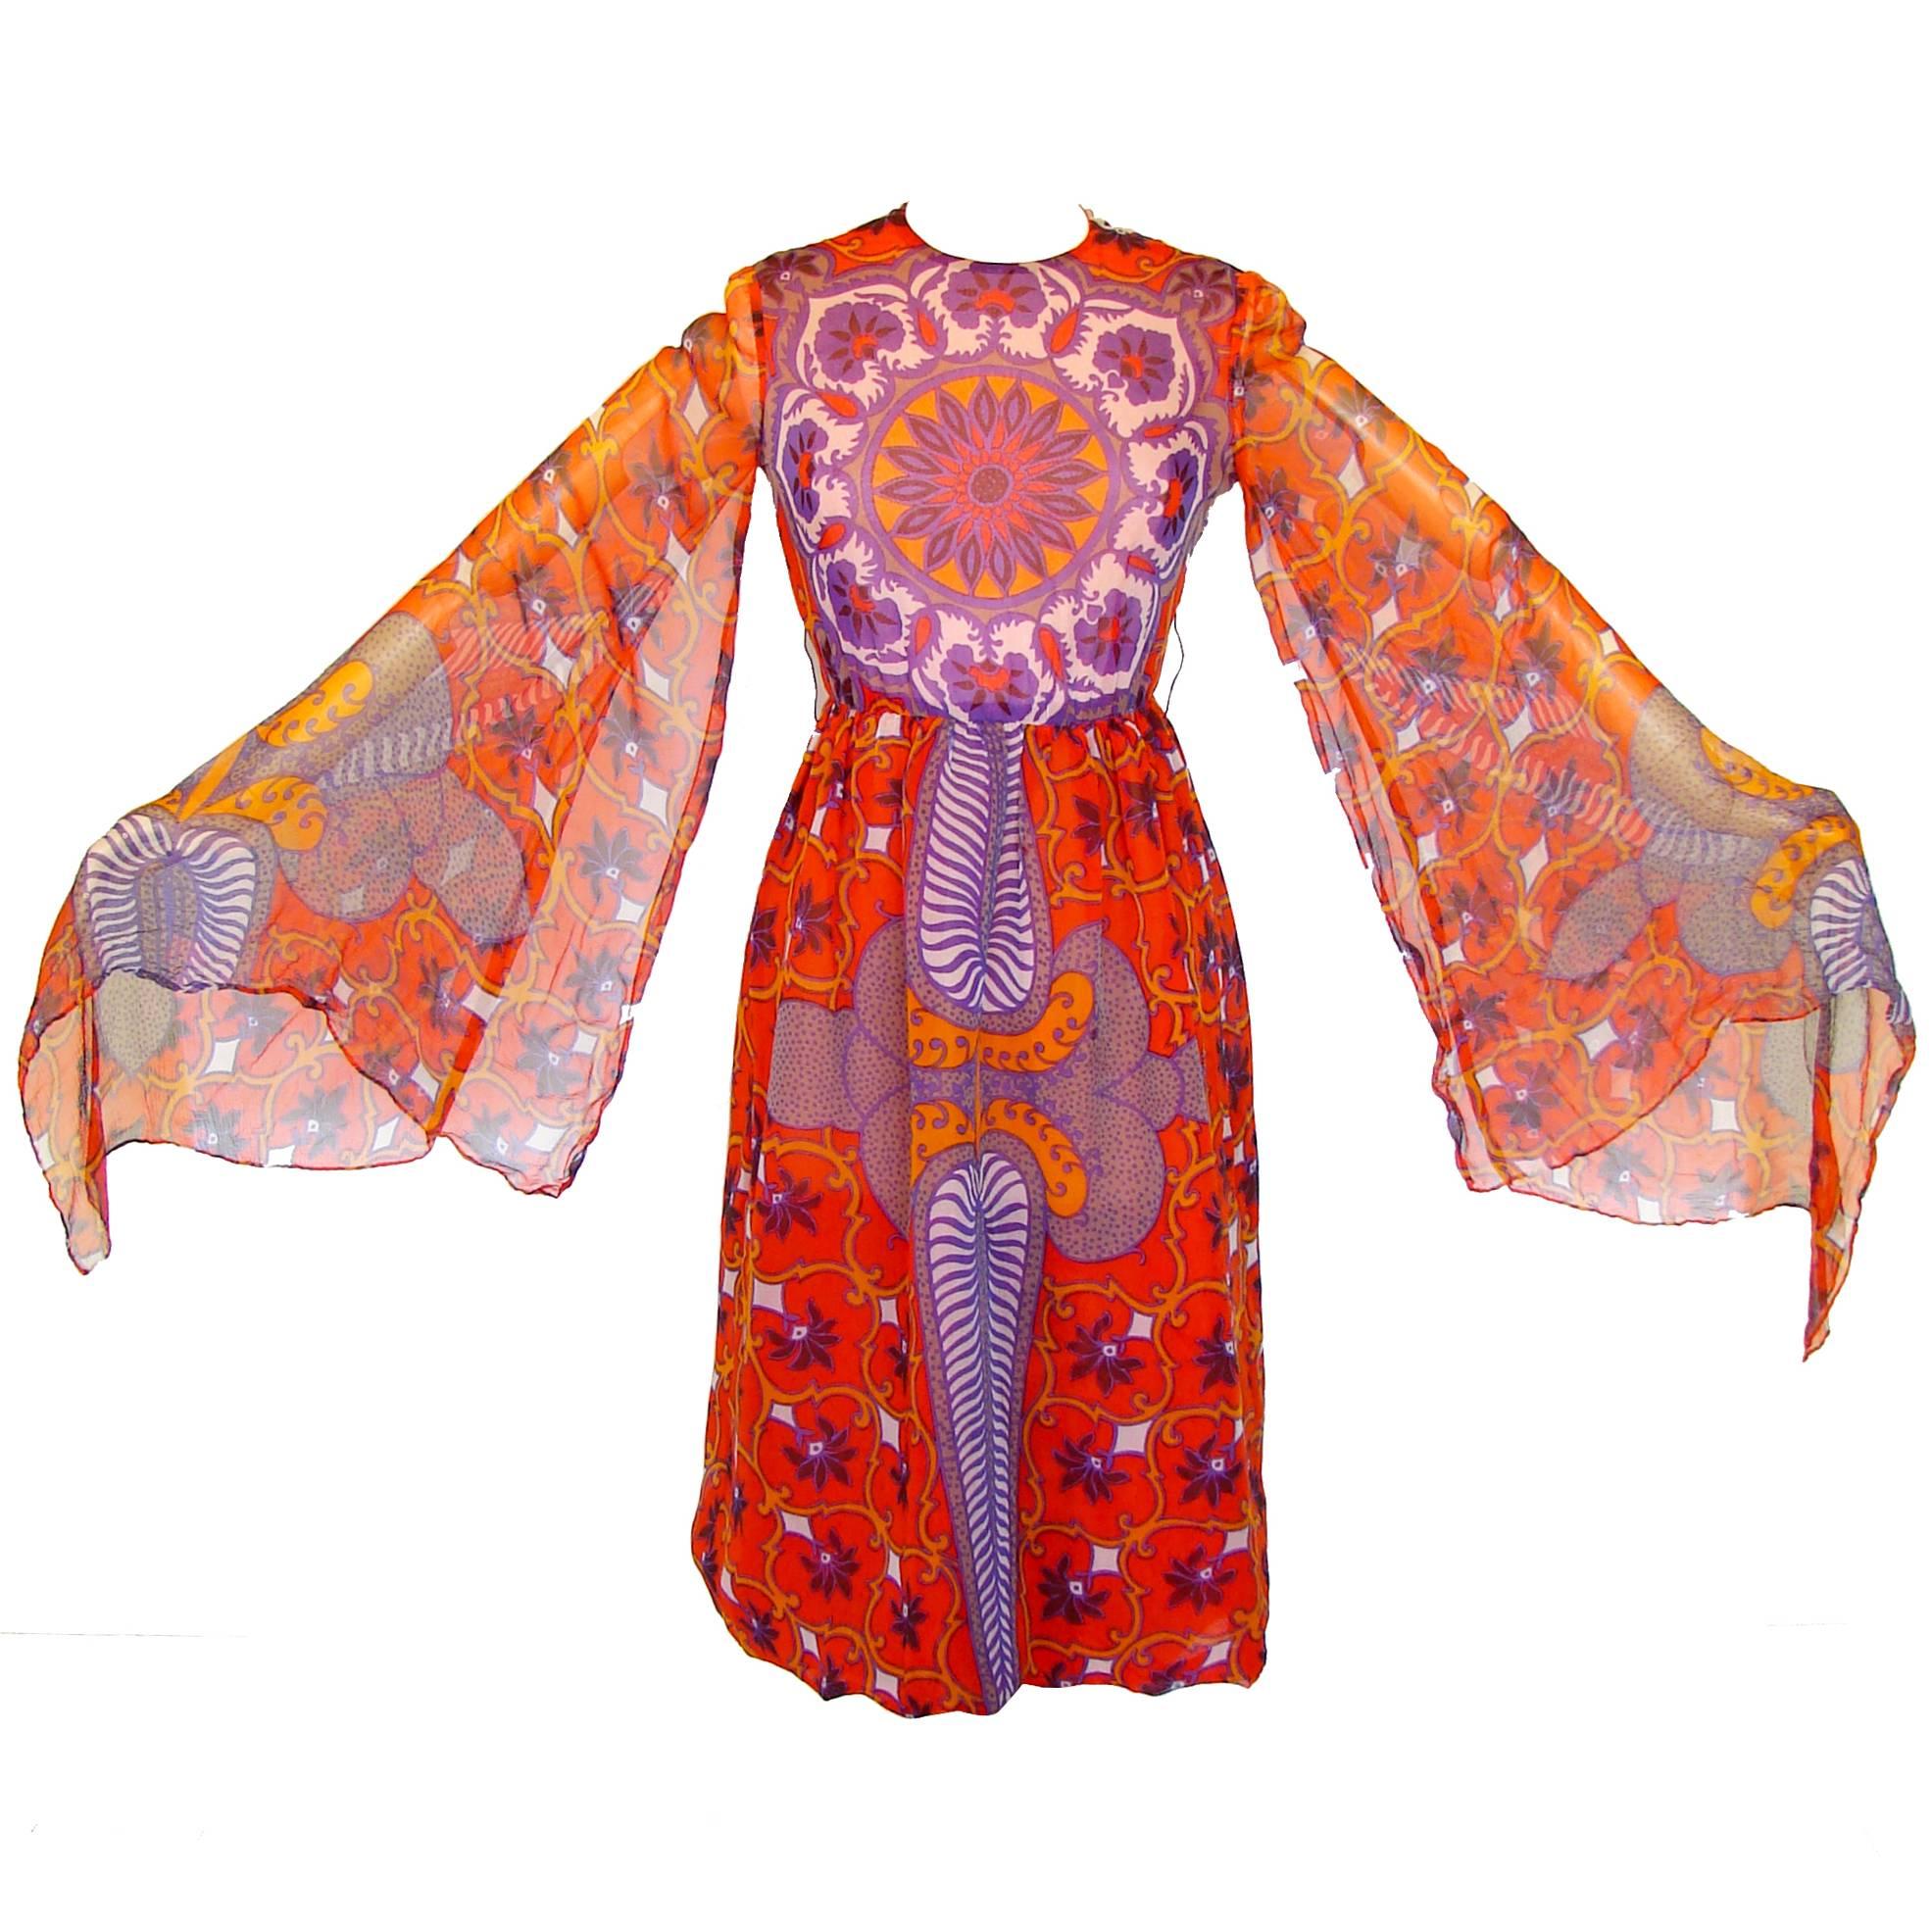 Bill Blass Ethereal Floral Chiffon Dress with Sweeping Angel Sleeves Sz 10 1970s